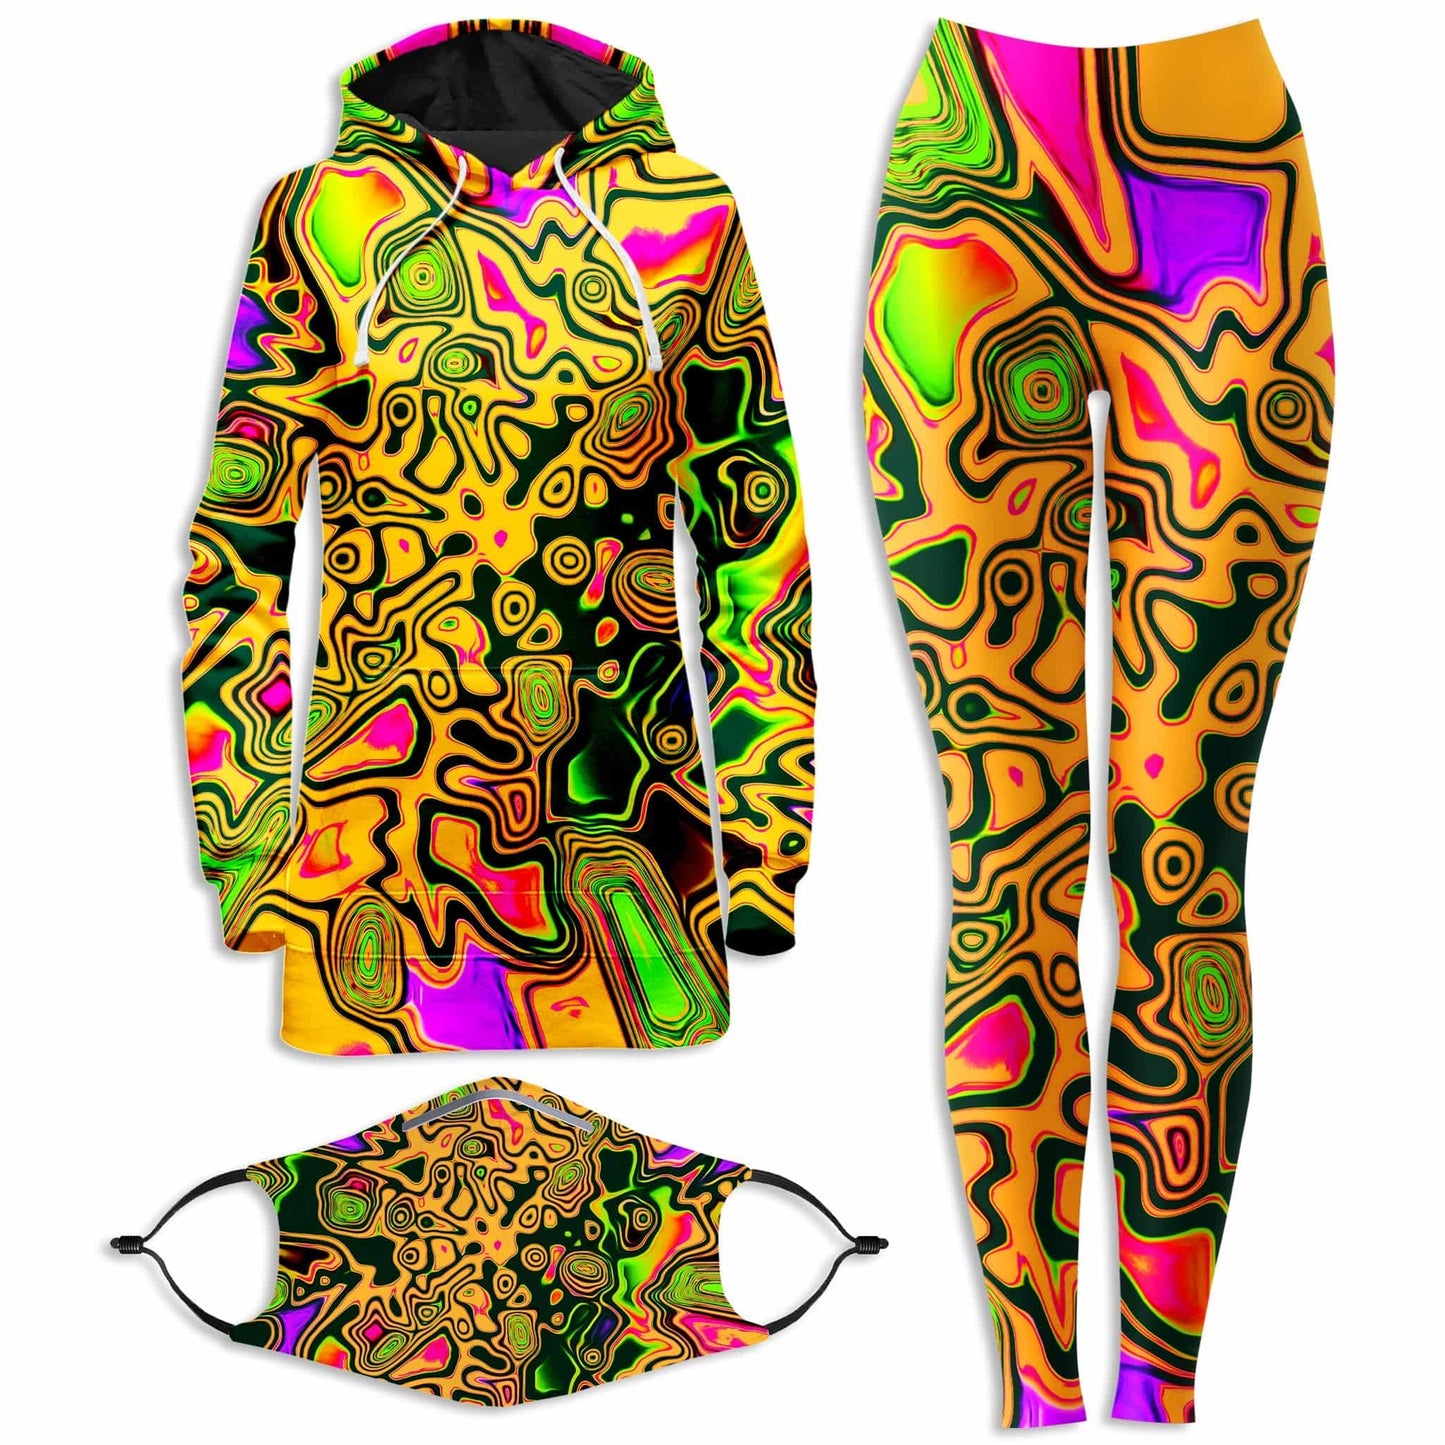 Splash Of The 90s Hoodie Dress and Leggings with PM 2.5 Face Mask Combo, Big Tex Funkadelic, | iEDM